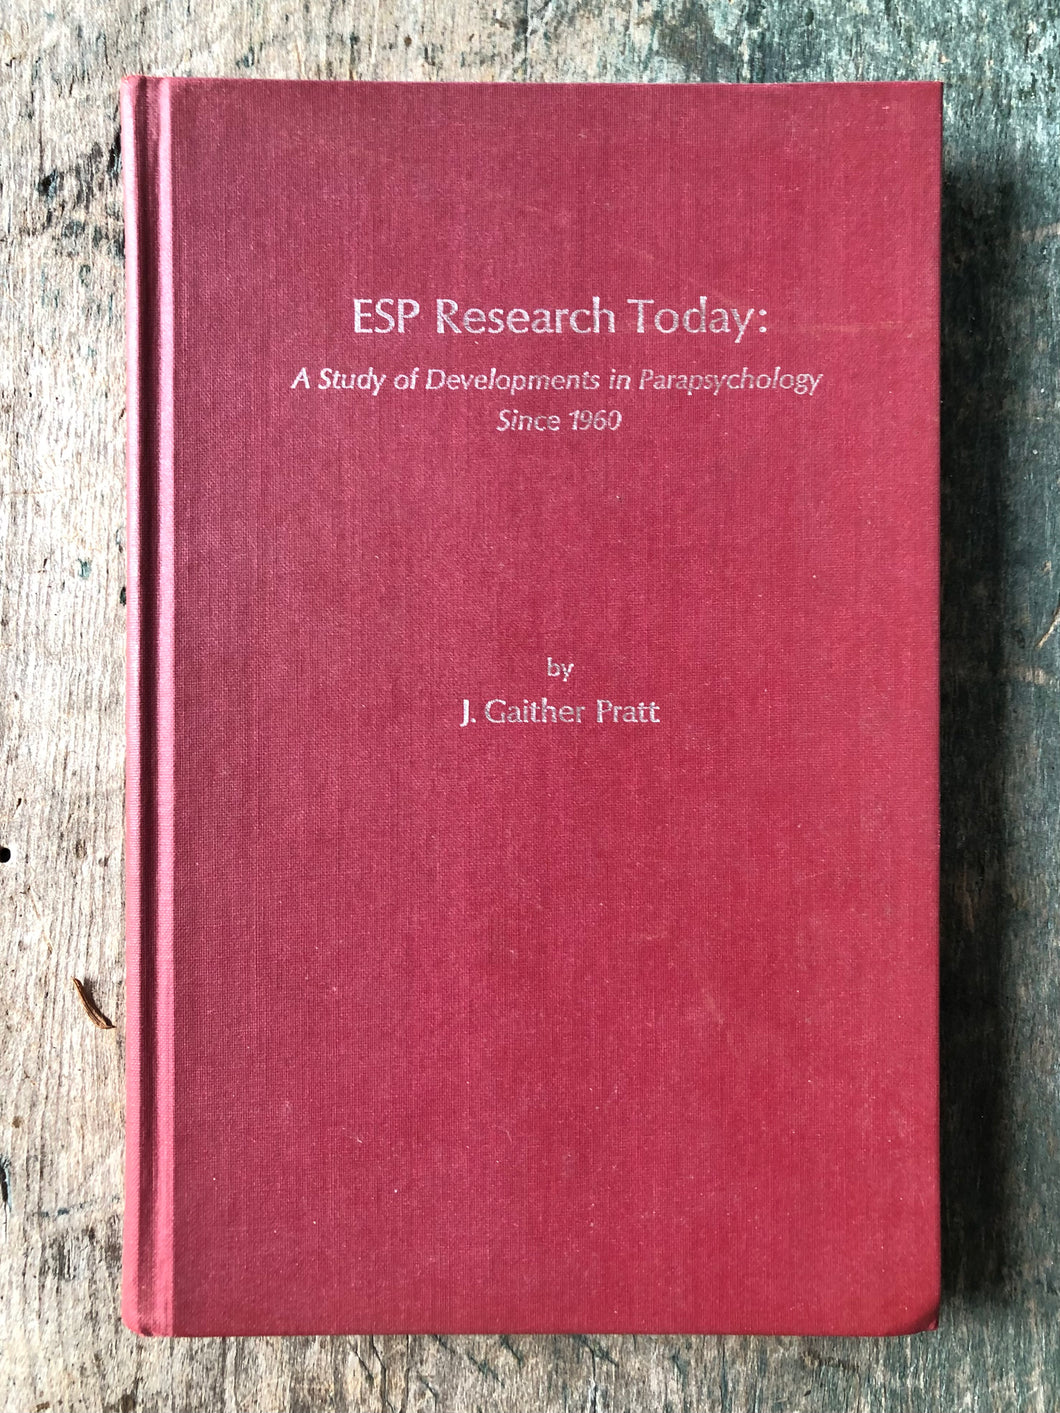 ESP Research Today: A Study of Developments in Parapsychology since 1960 by J. Gaither Pratt